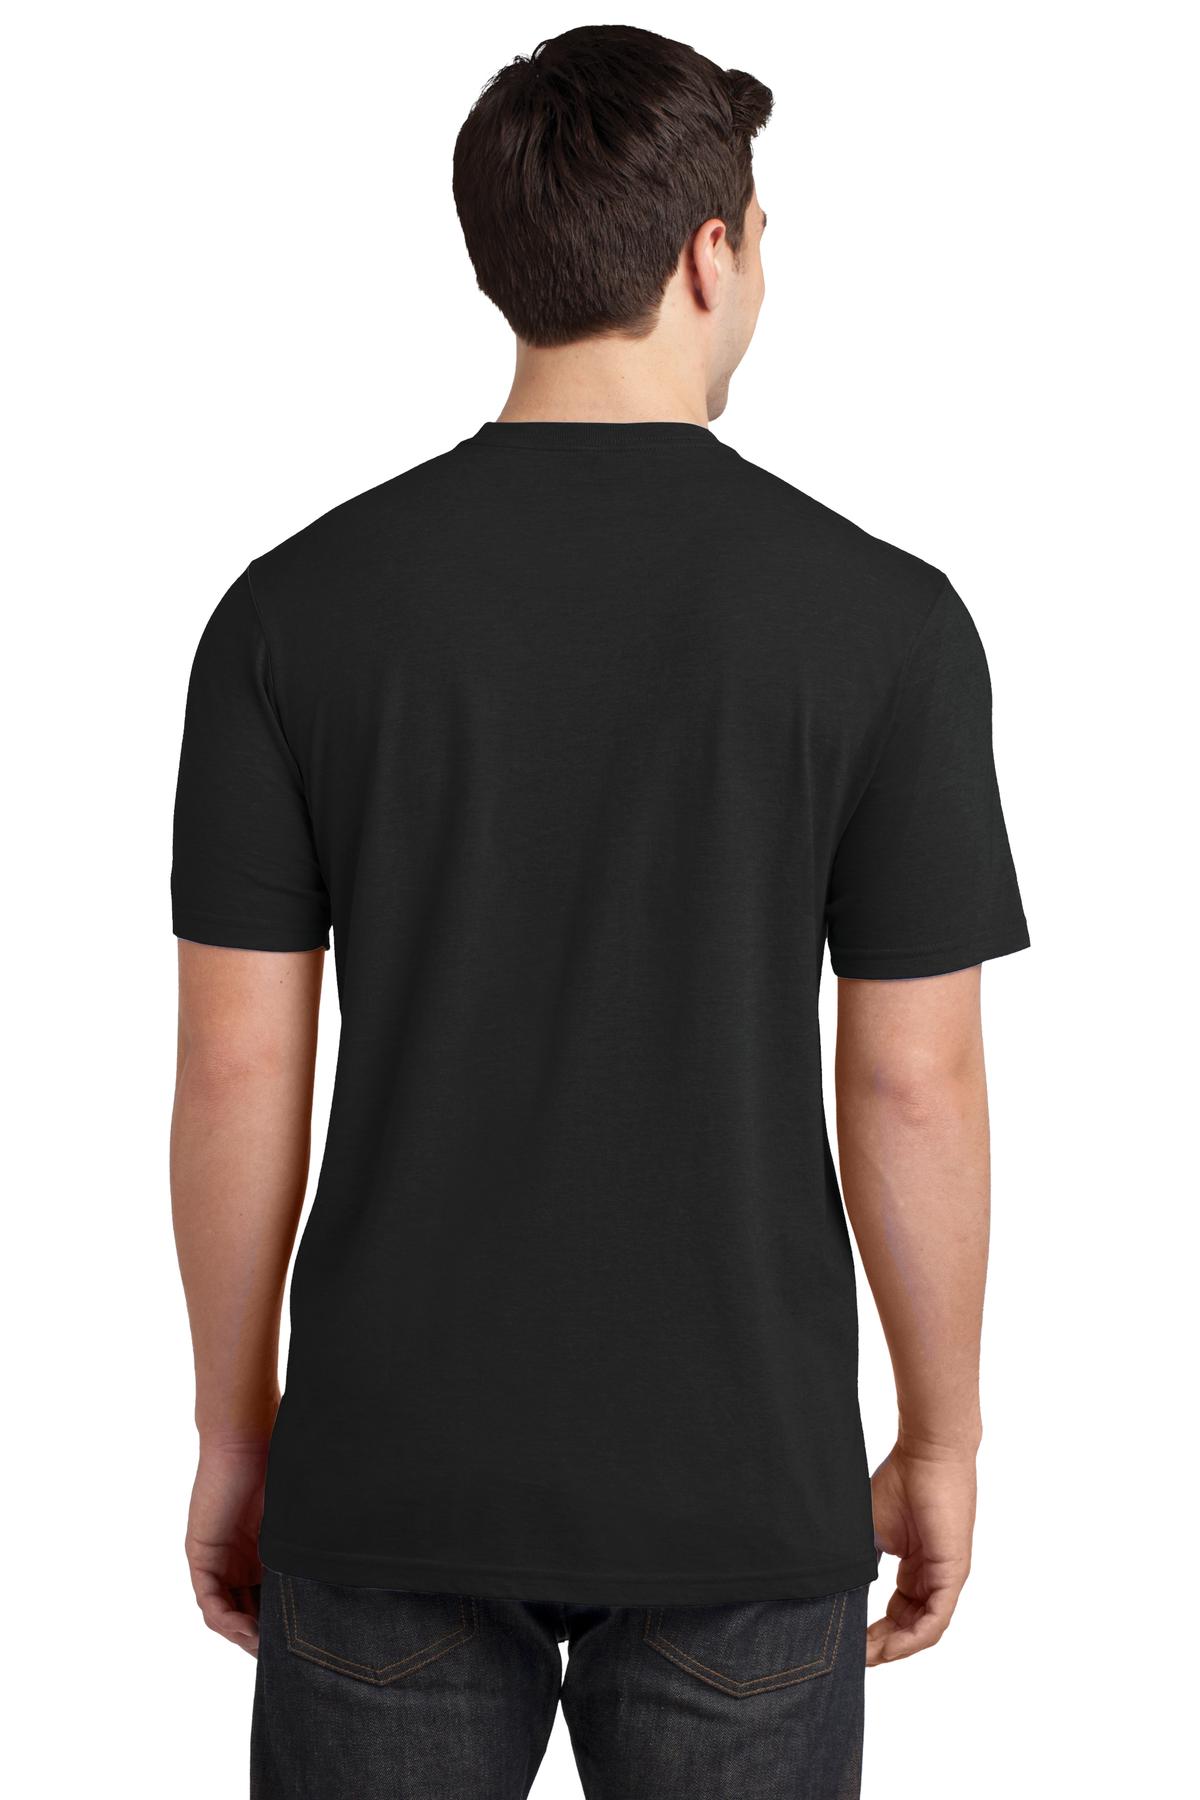 District DT6000P | Very Important Tee ® with Pocket | ShirtSpace